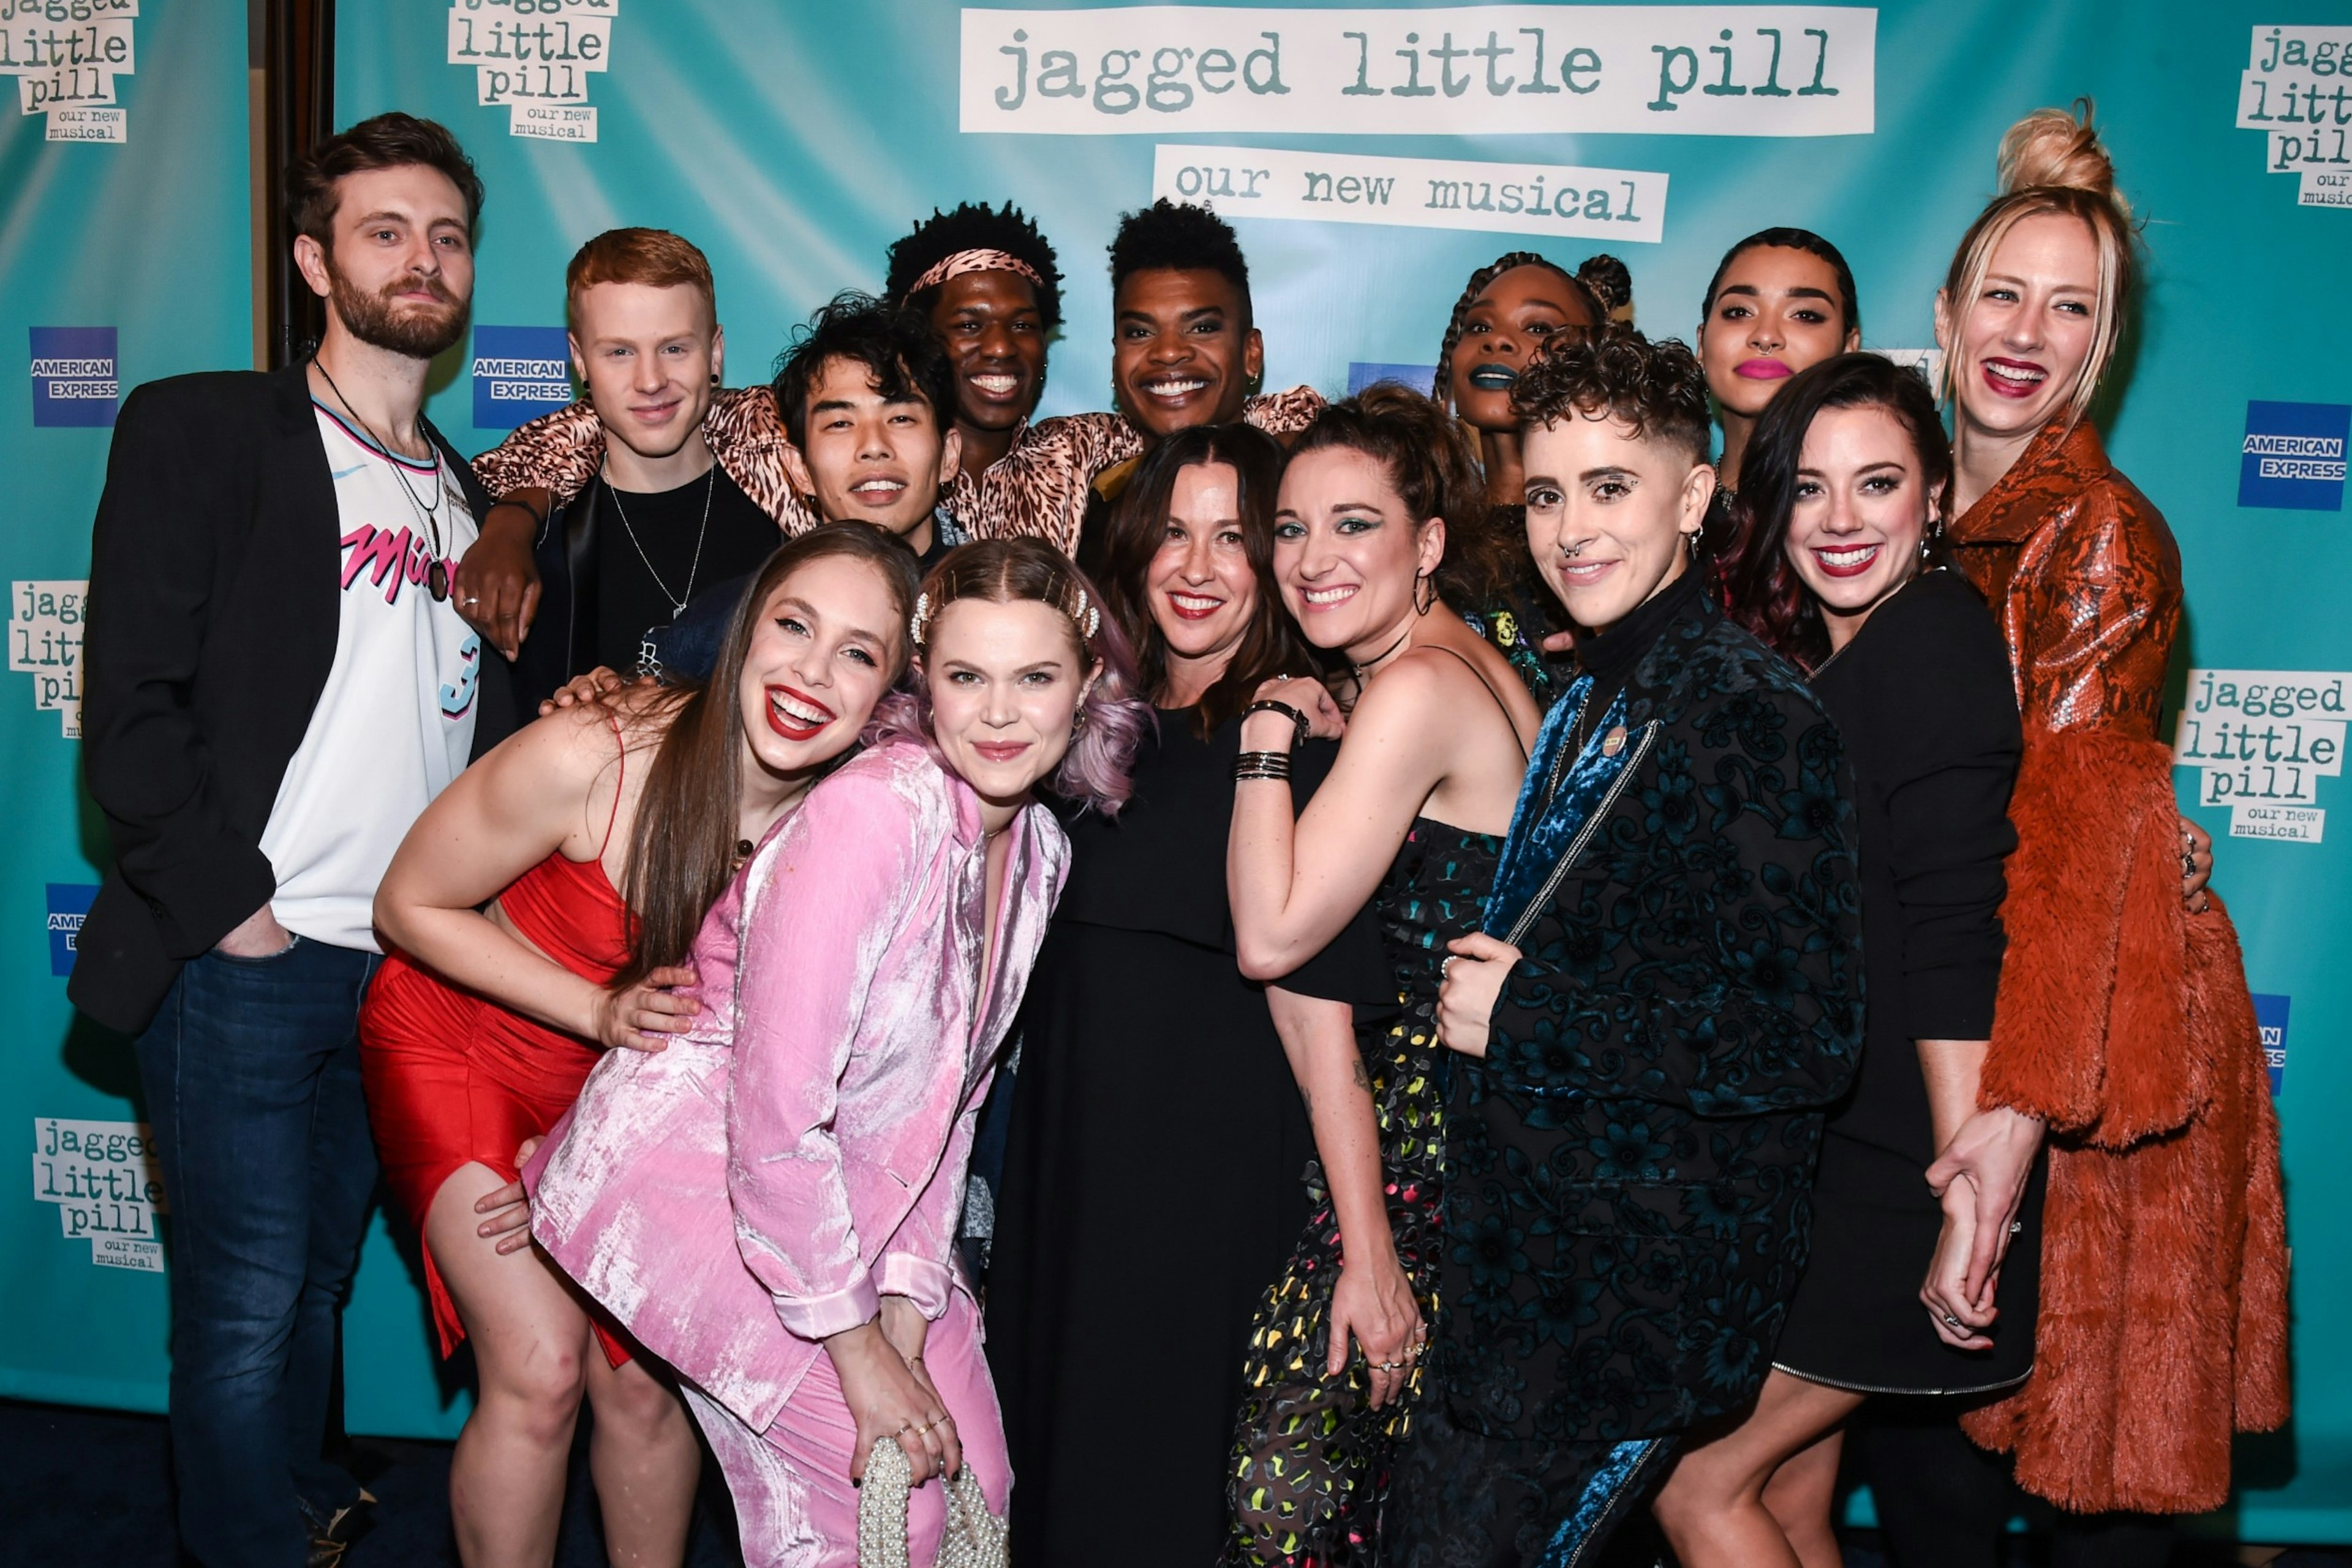 Alanis Morisette with the cast of "Jagged Little Pill"  on opening night